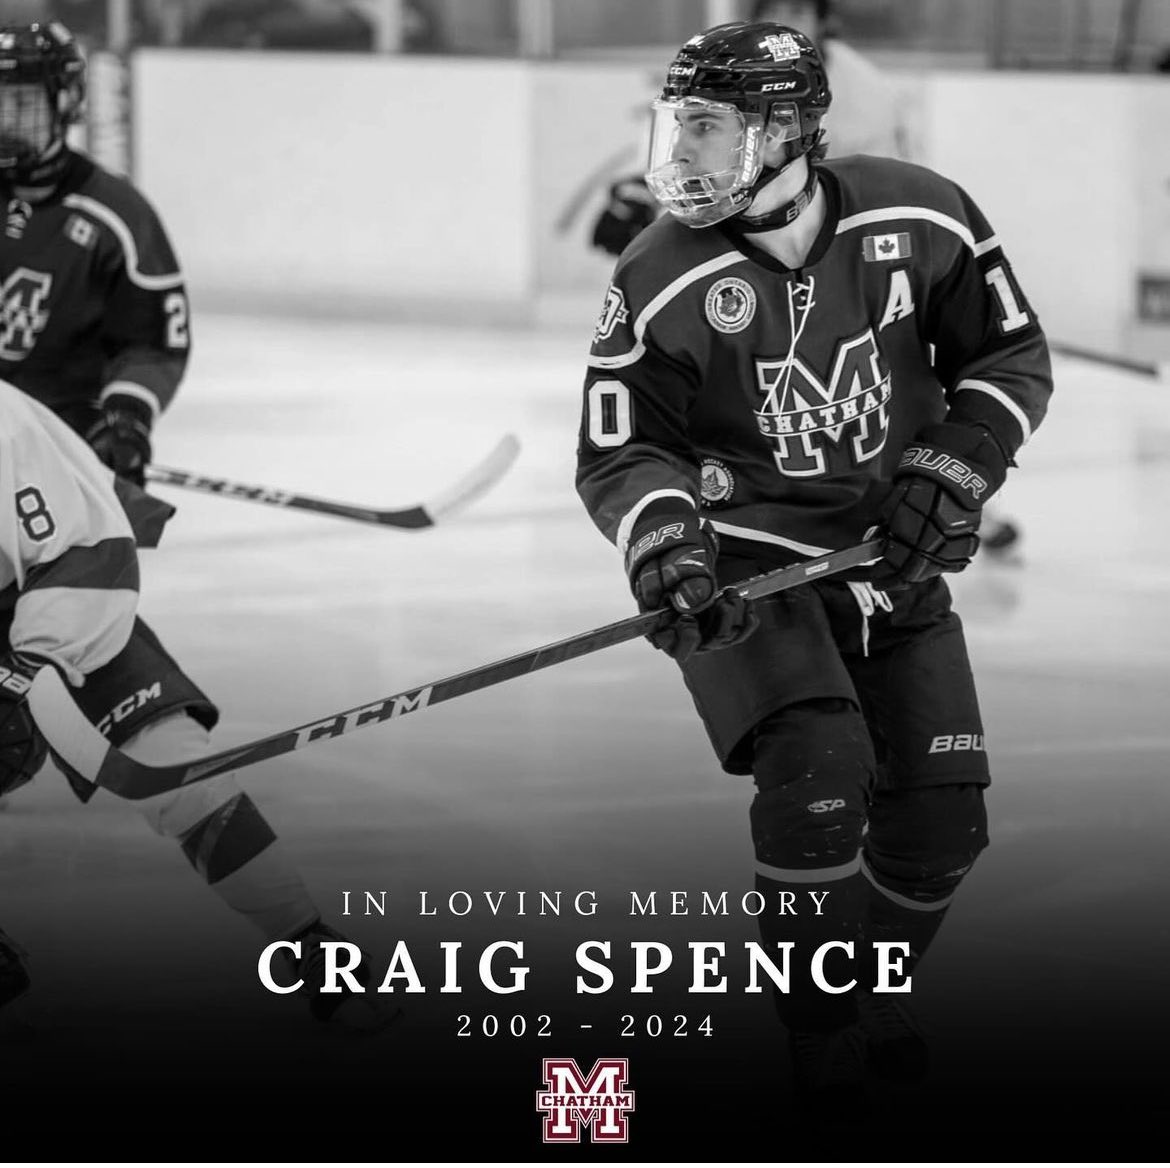 The GOJHL sends their deepest condolences to the Spence Family❤️. His passion will always be cherished, forever in our hearts.